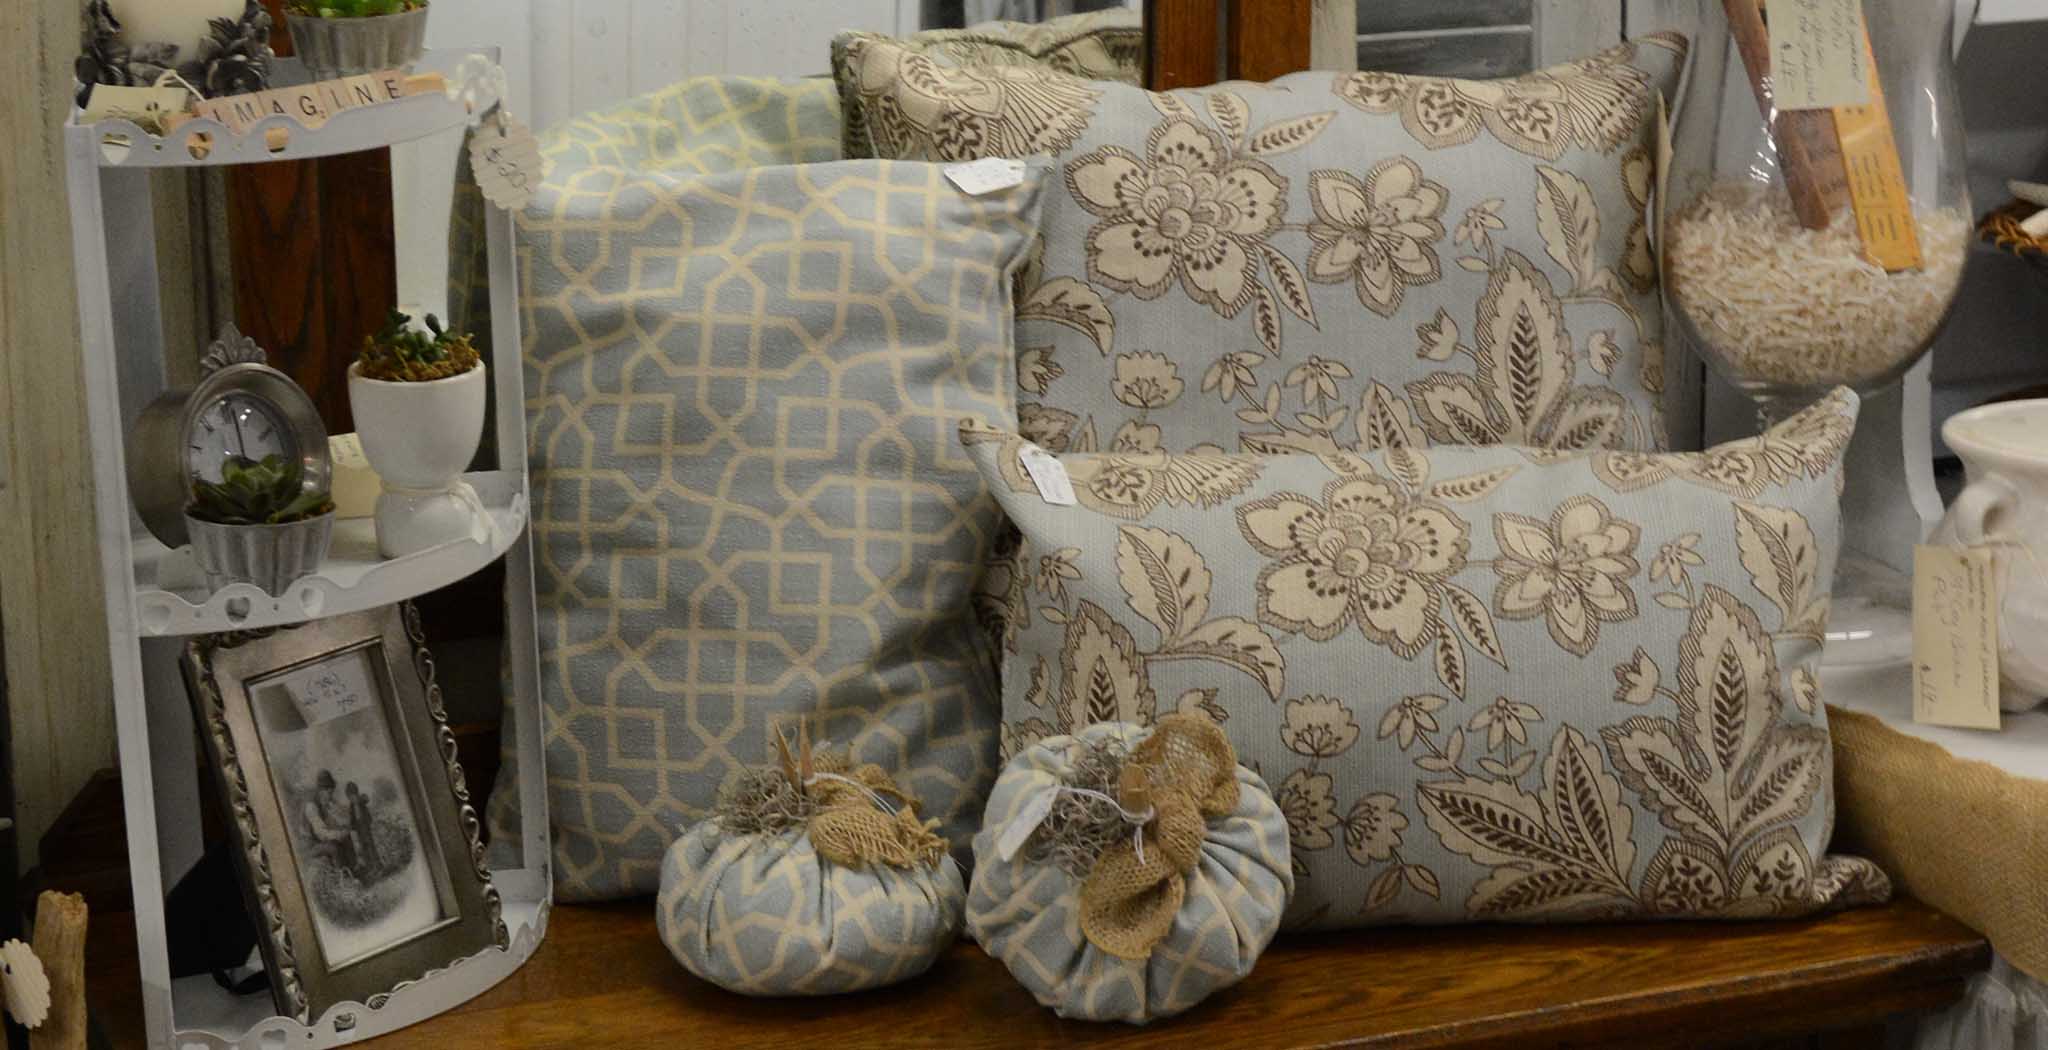 Cushions to complement a Southern antiques design theme